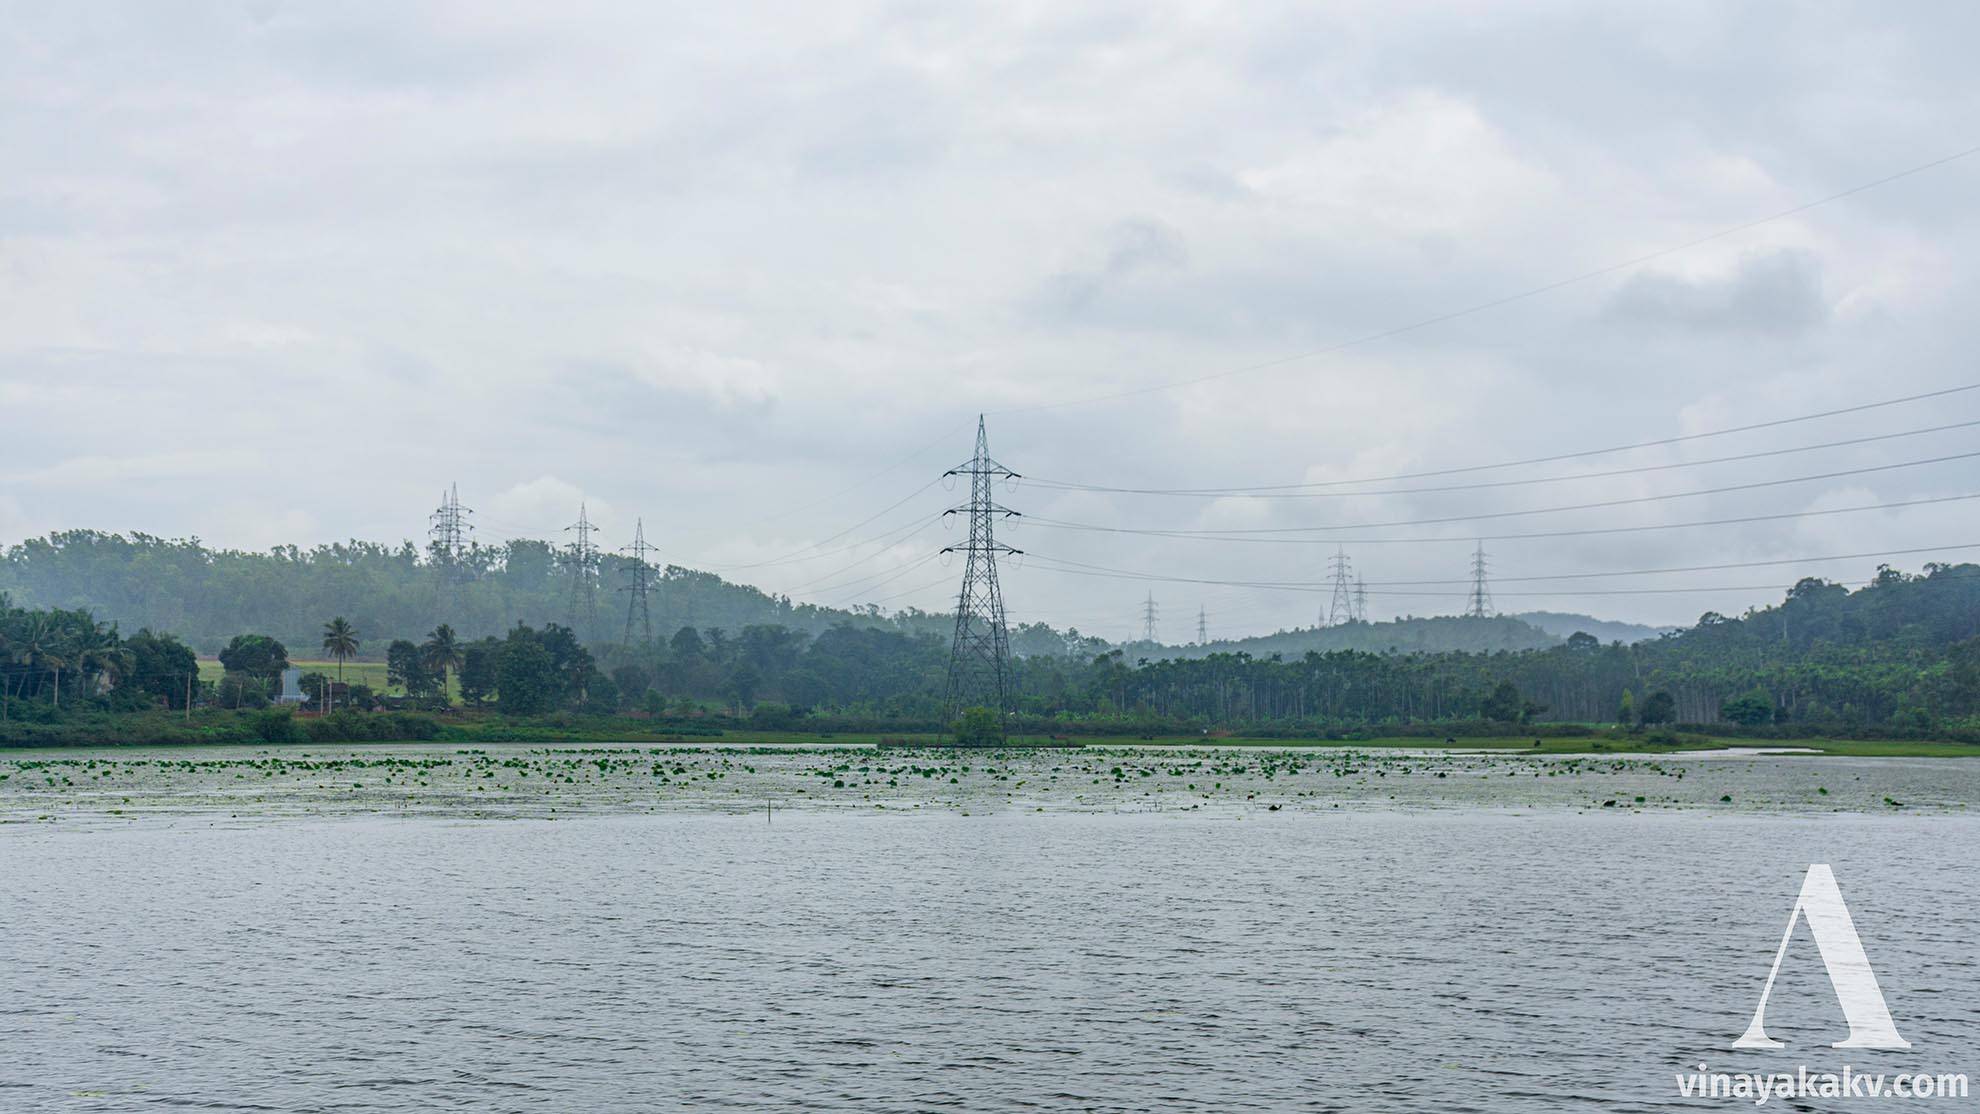 A lake with power lines, notice the terrain there is not so hilly